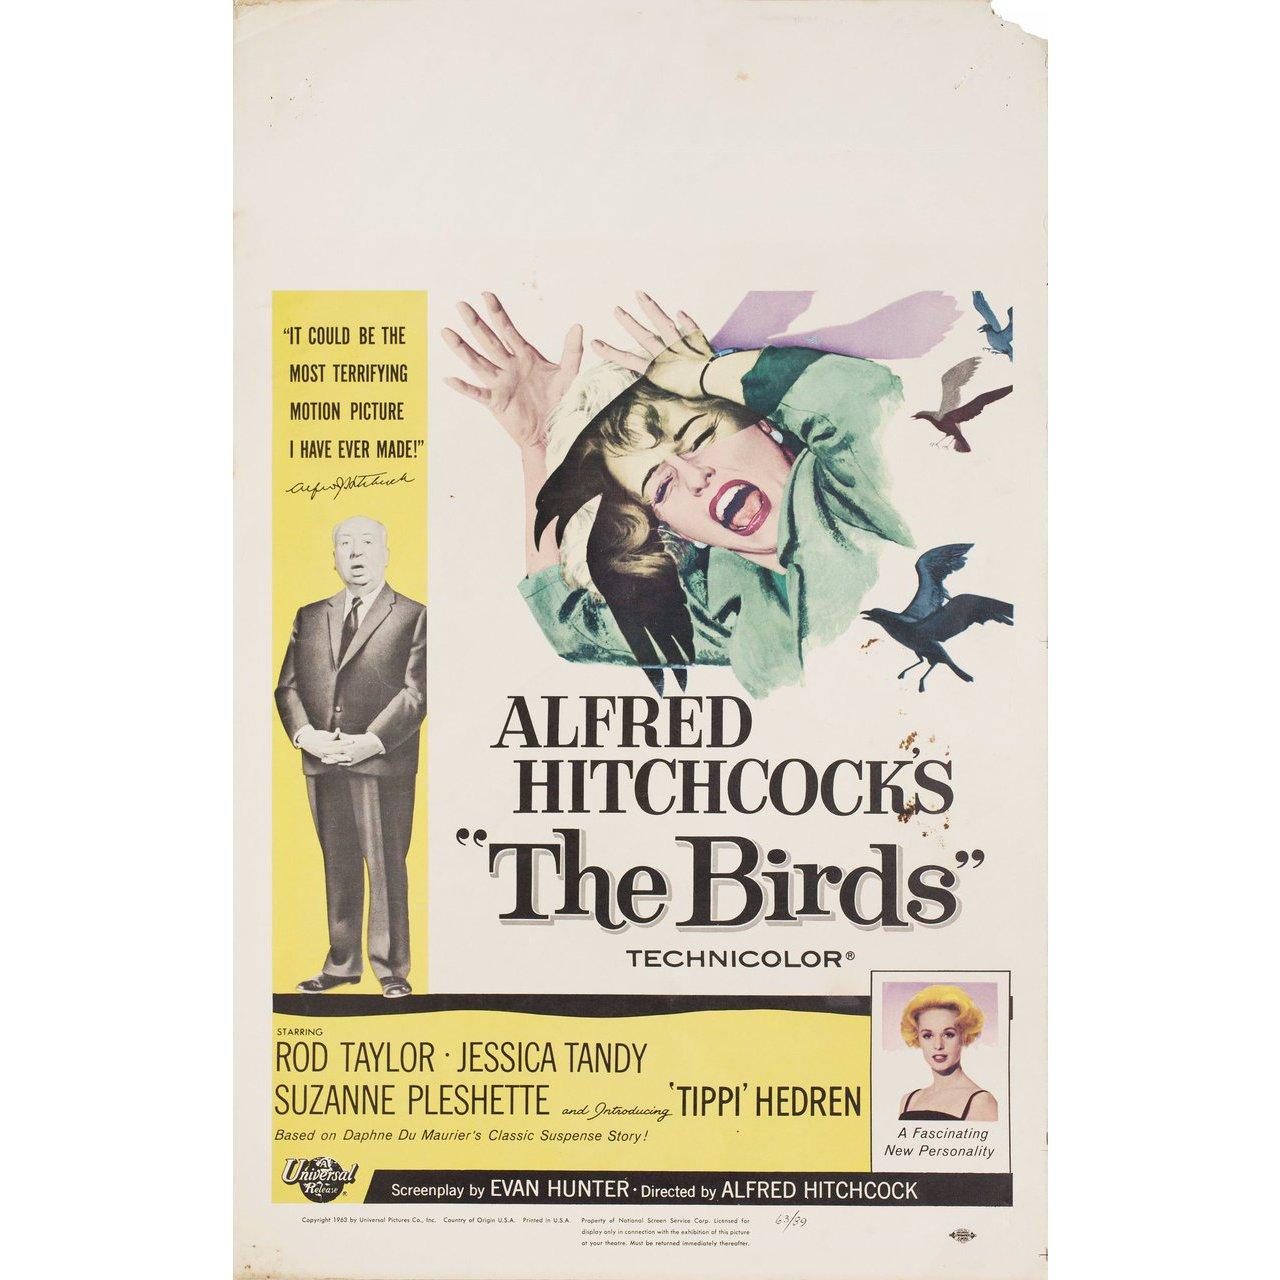 Original 1963 U.S. window card poster for the film The Birds directed by Alfred Hitchcock with Tippi Hedren / Suzanne Pleshette / Rod Taylor / Jessica Tandy. Very Good-Fine condition, rolled with small stains. Please note: the size is stated in